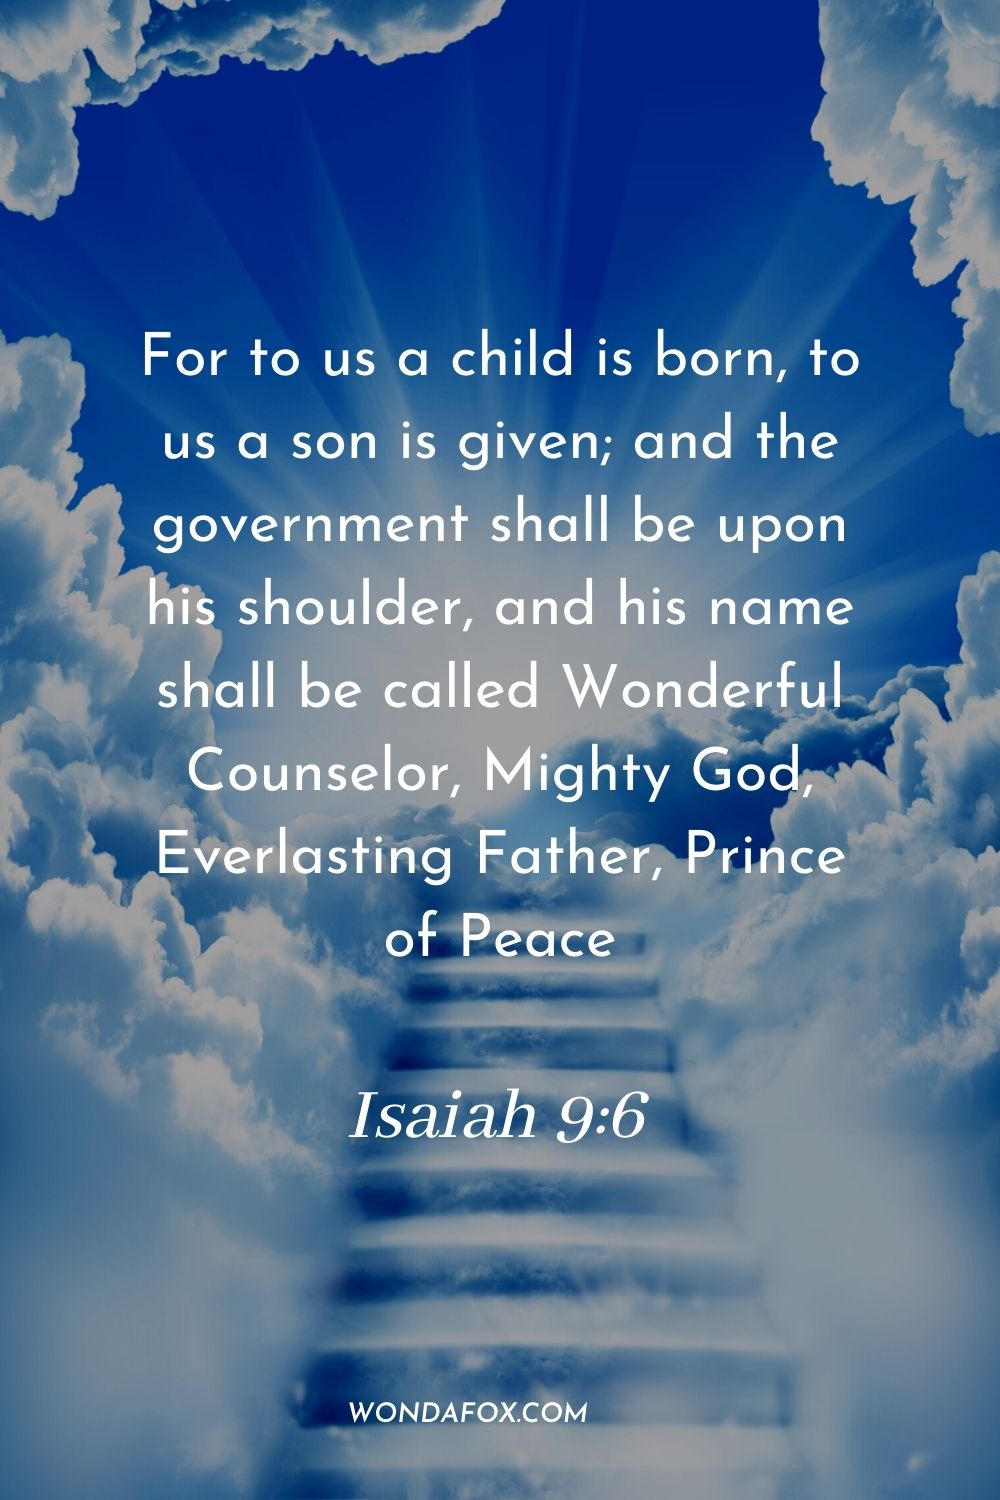 For to us a child is born, to us a son is given; and the government shall be upon his shoulder, and his name shall be called Wonderful Counselor, Mighty God, Everlasting Father, Prince of Peace. Isaiah 9:6